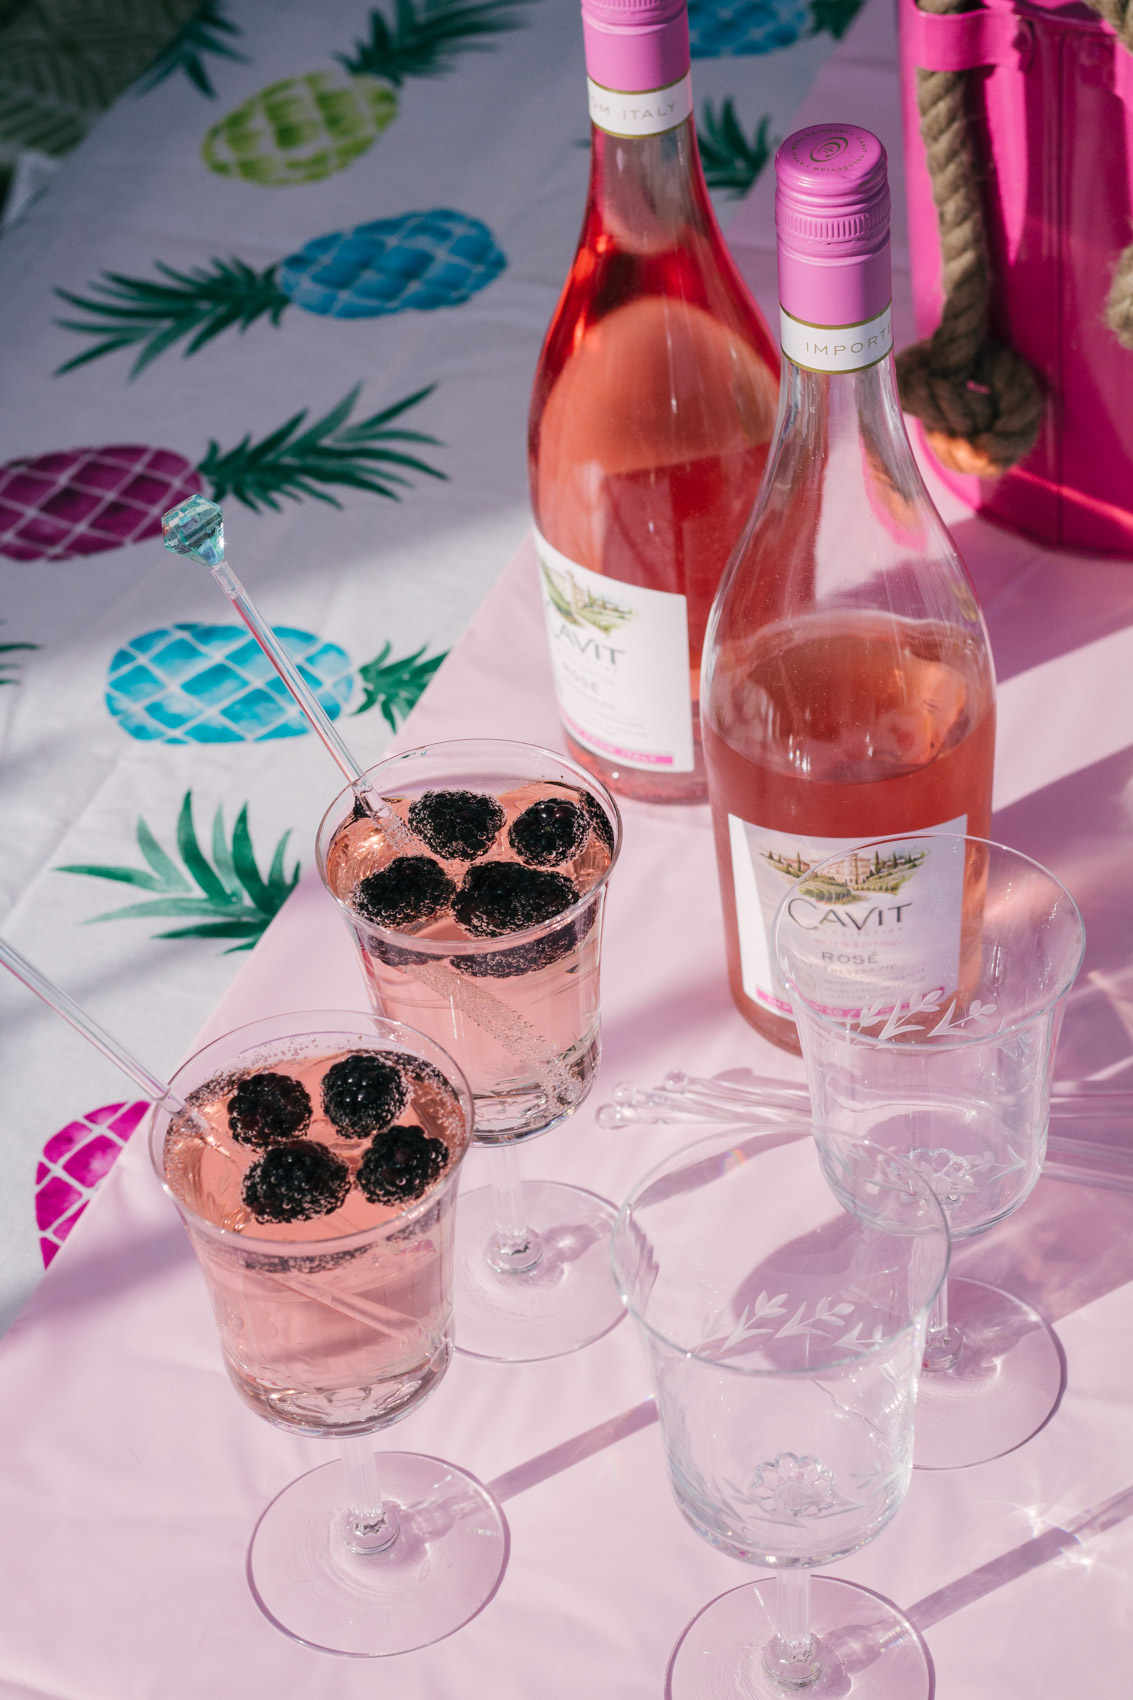 Keeping with the summer vibes, I'm excited to share a Rosé Cocktail recipe to give your unwinding and relaxation time an extra boost!